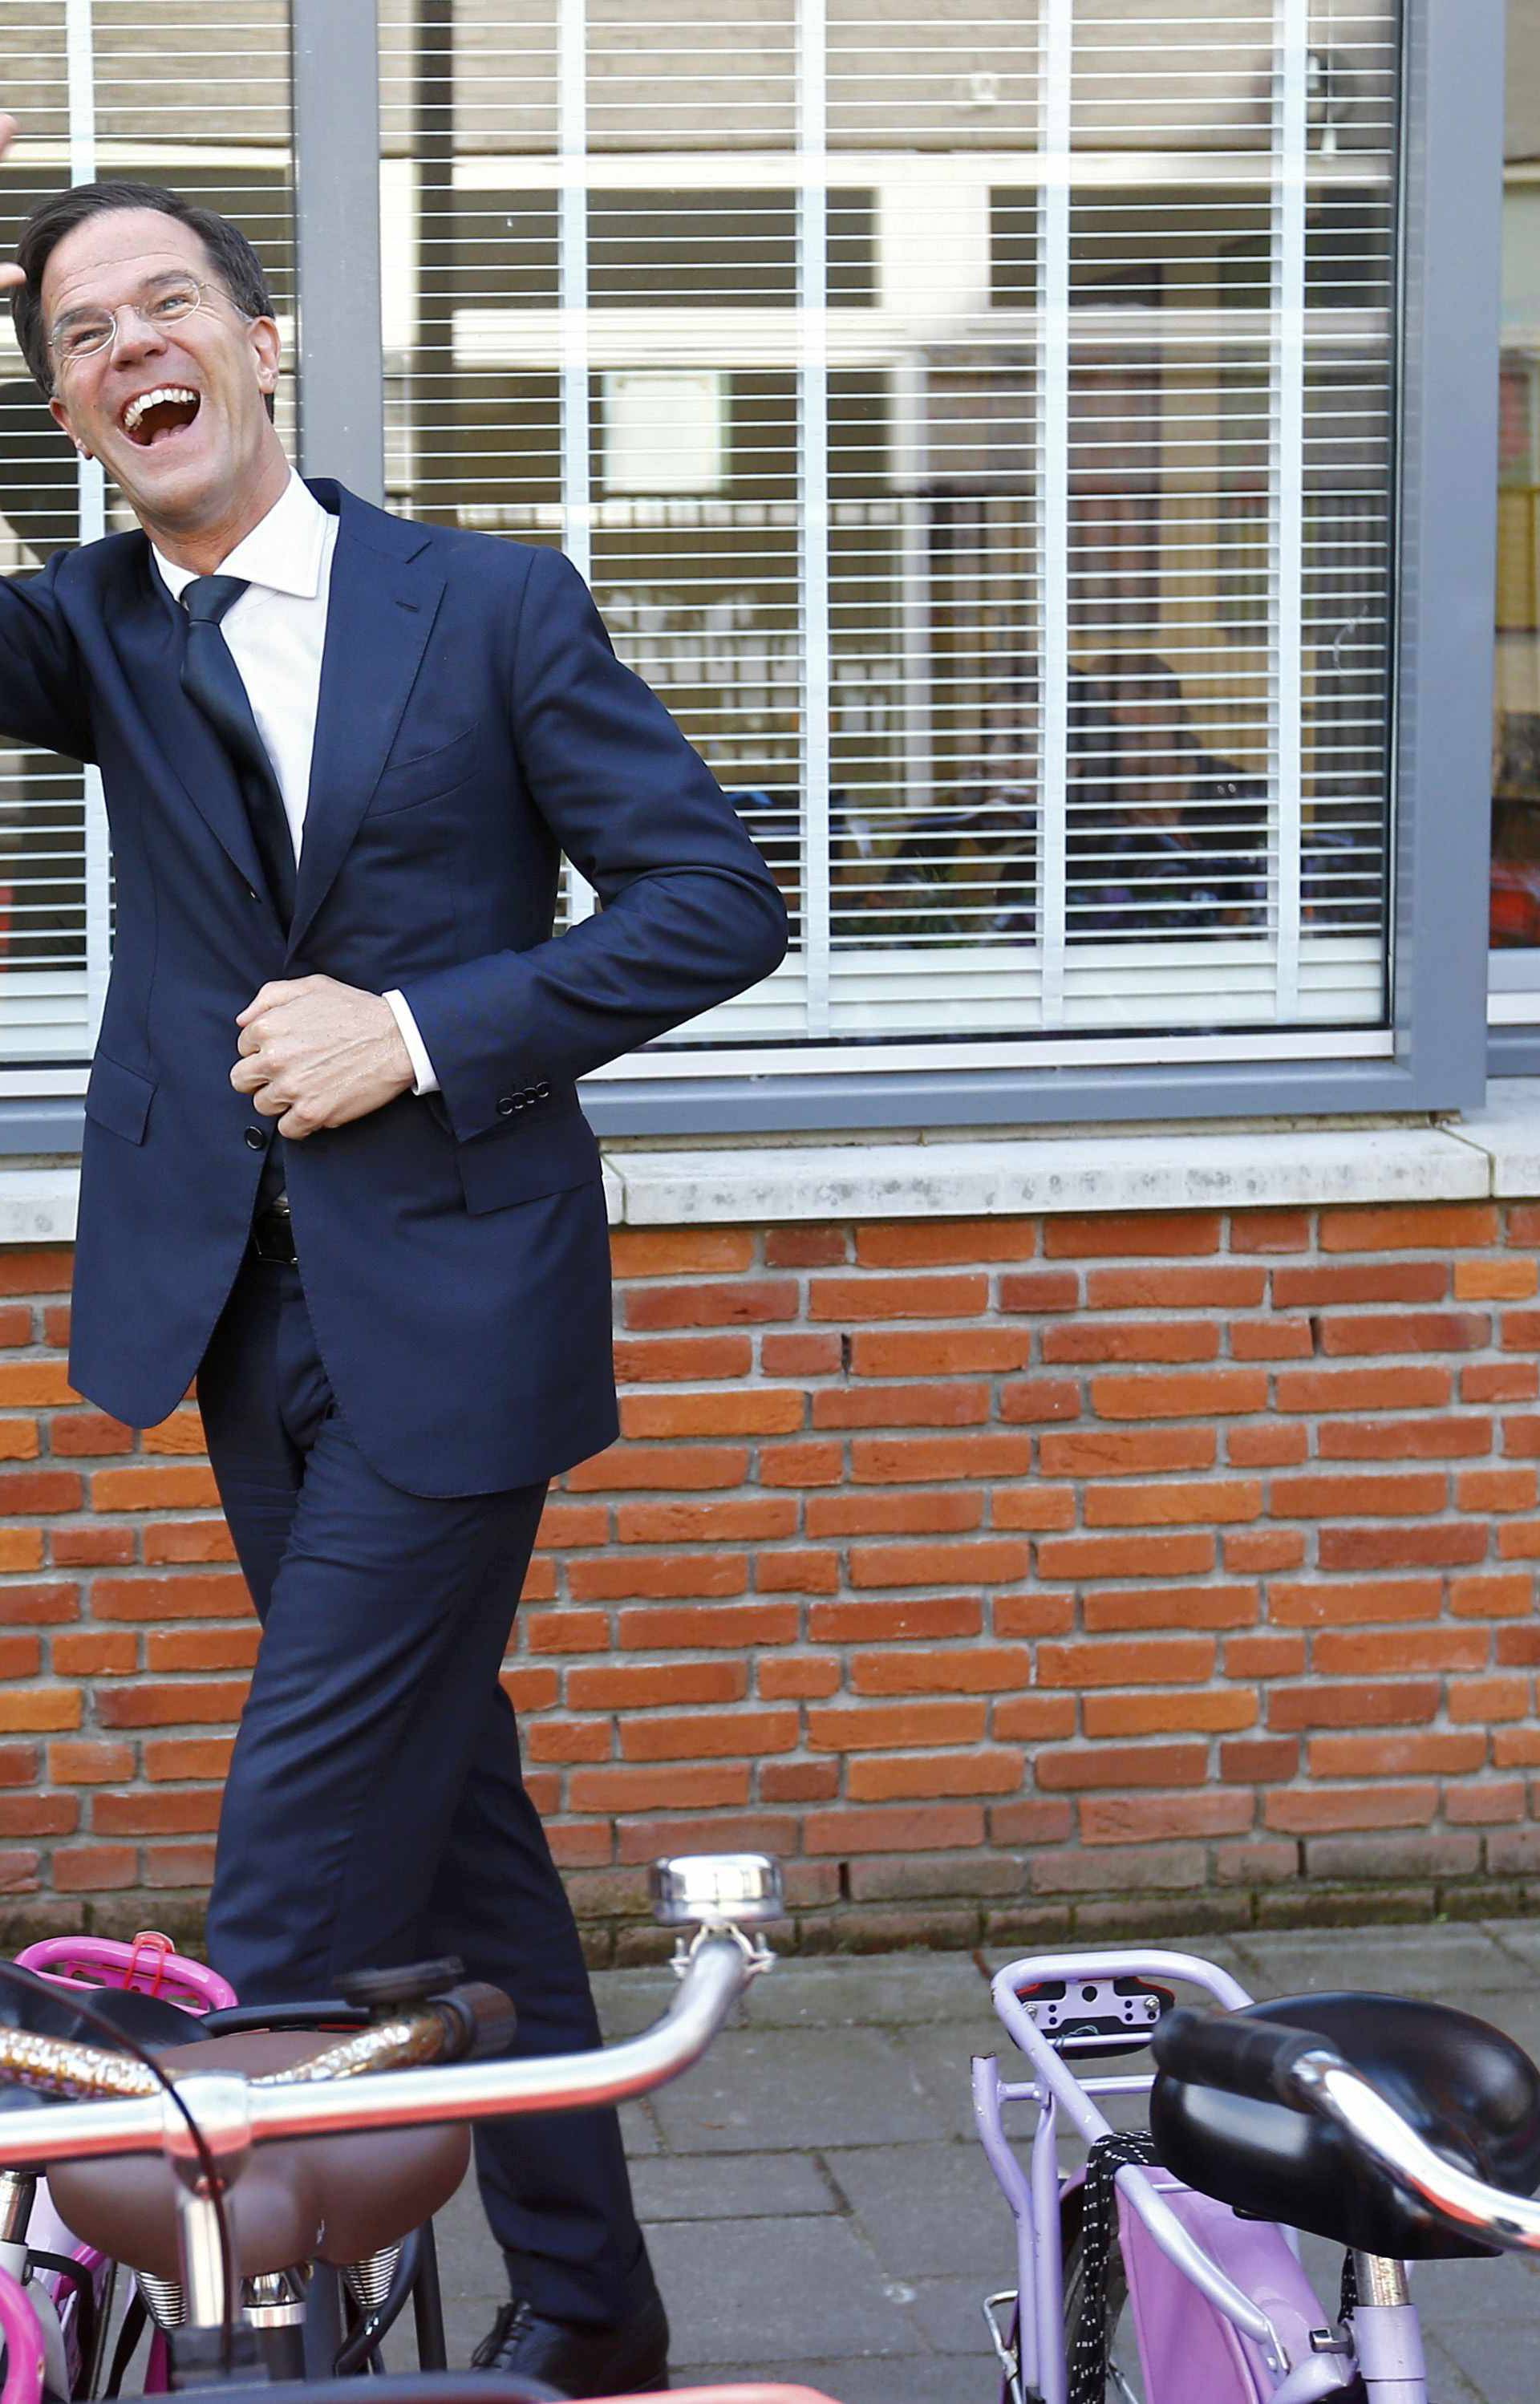 Dutch Prime Minister Mark Rutte of the VVD party waves after voting in the general election in The Hague